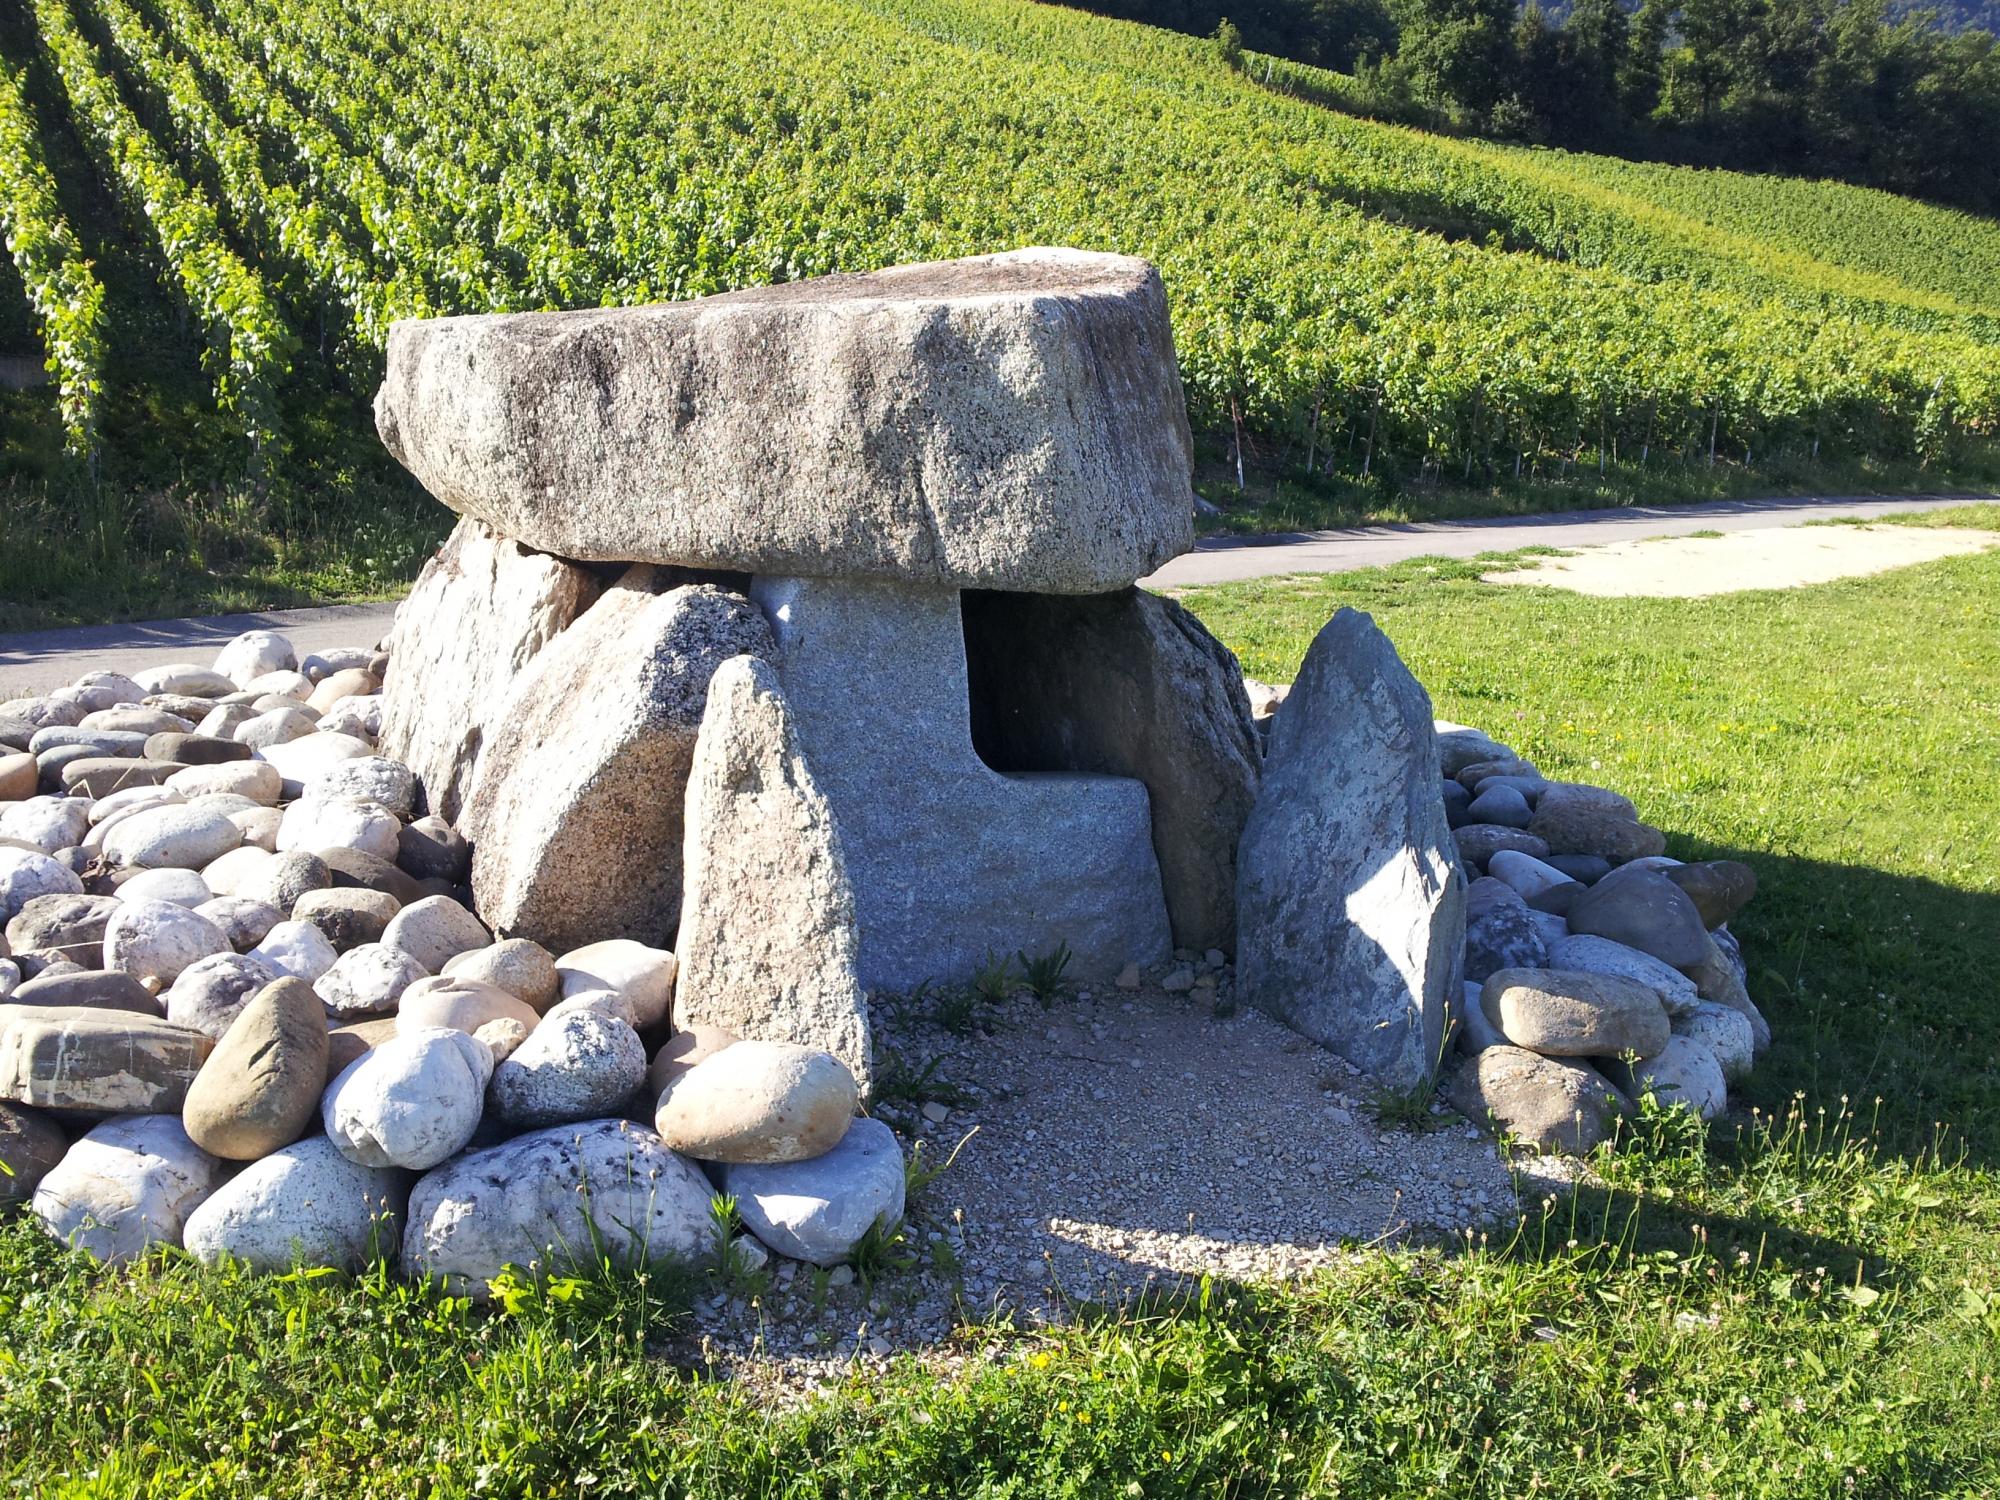 The Dolmen at Onnens